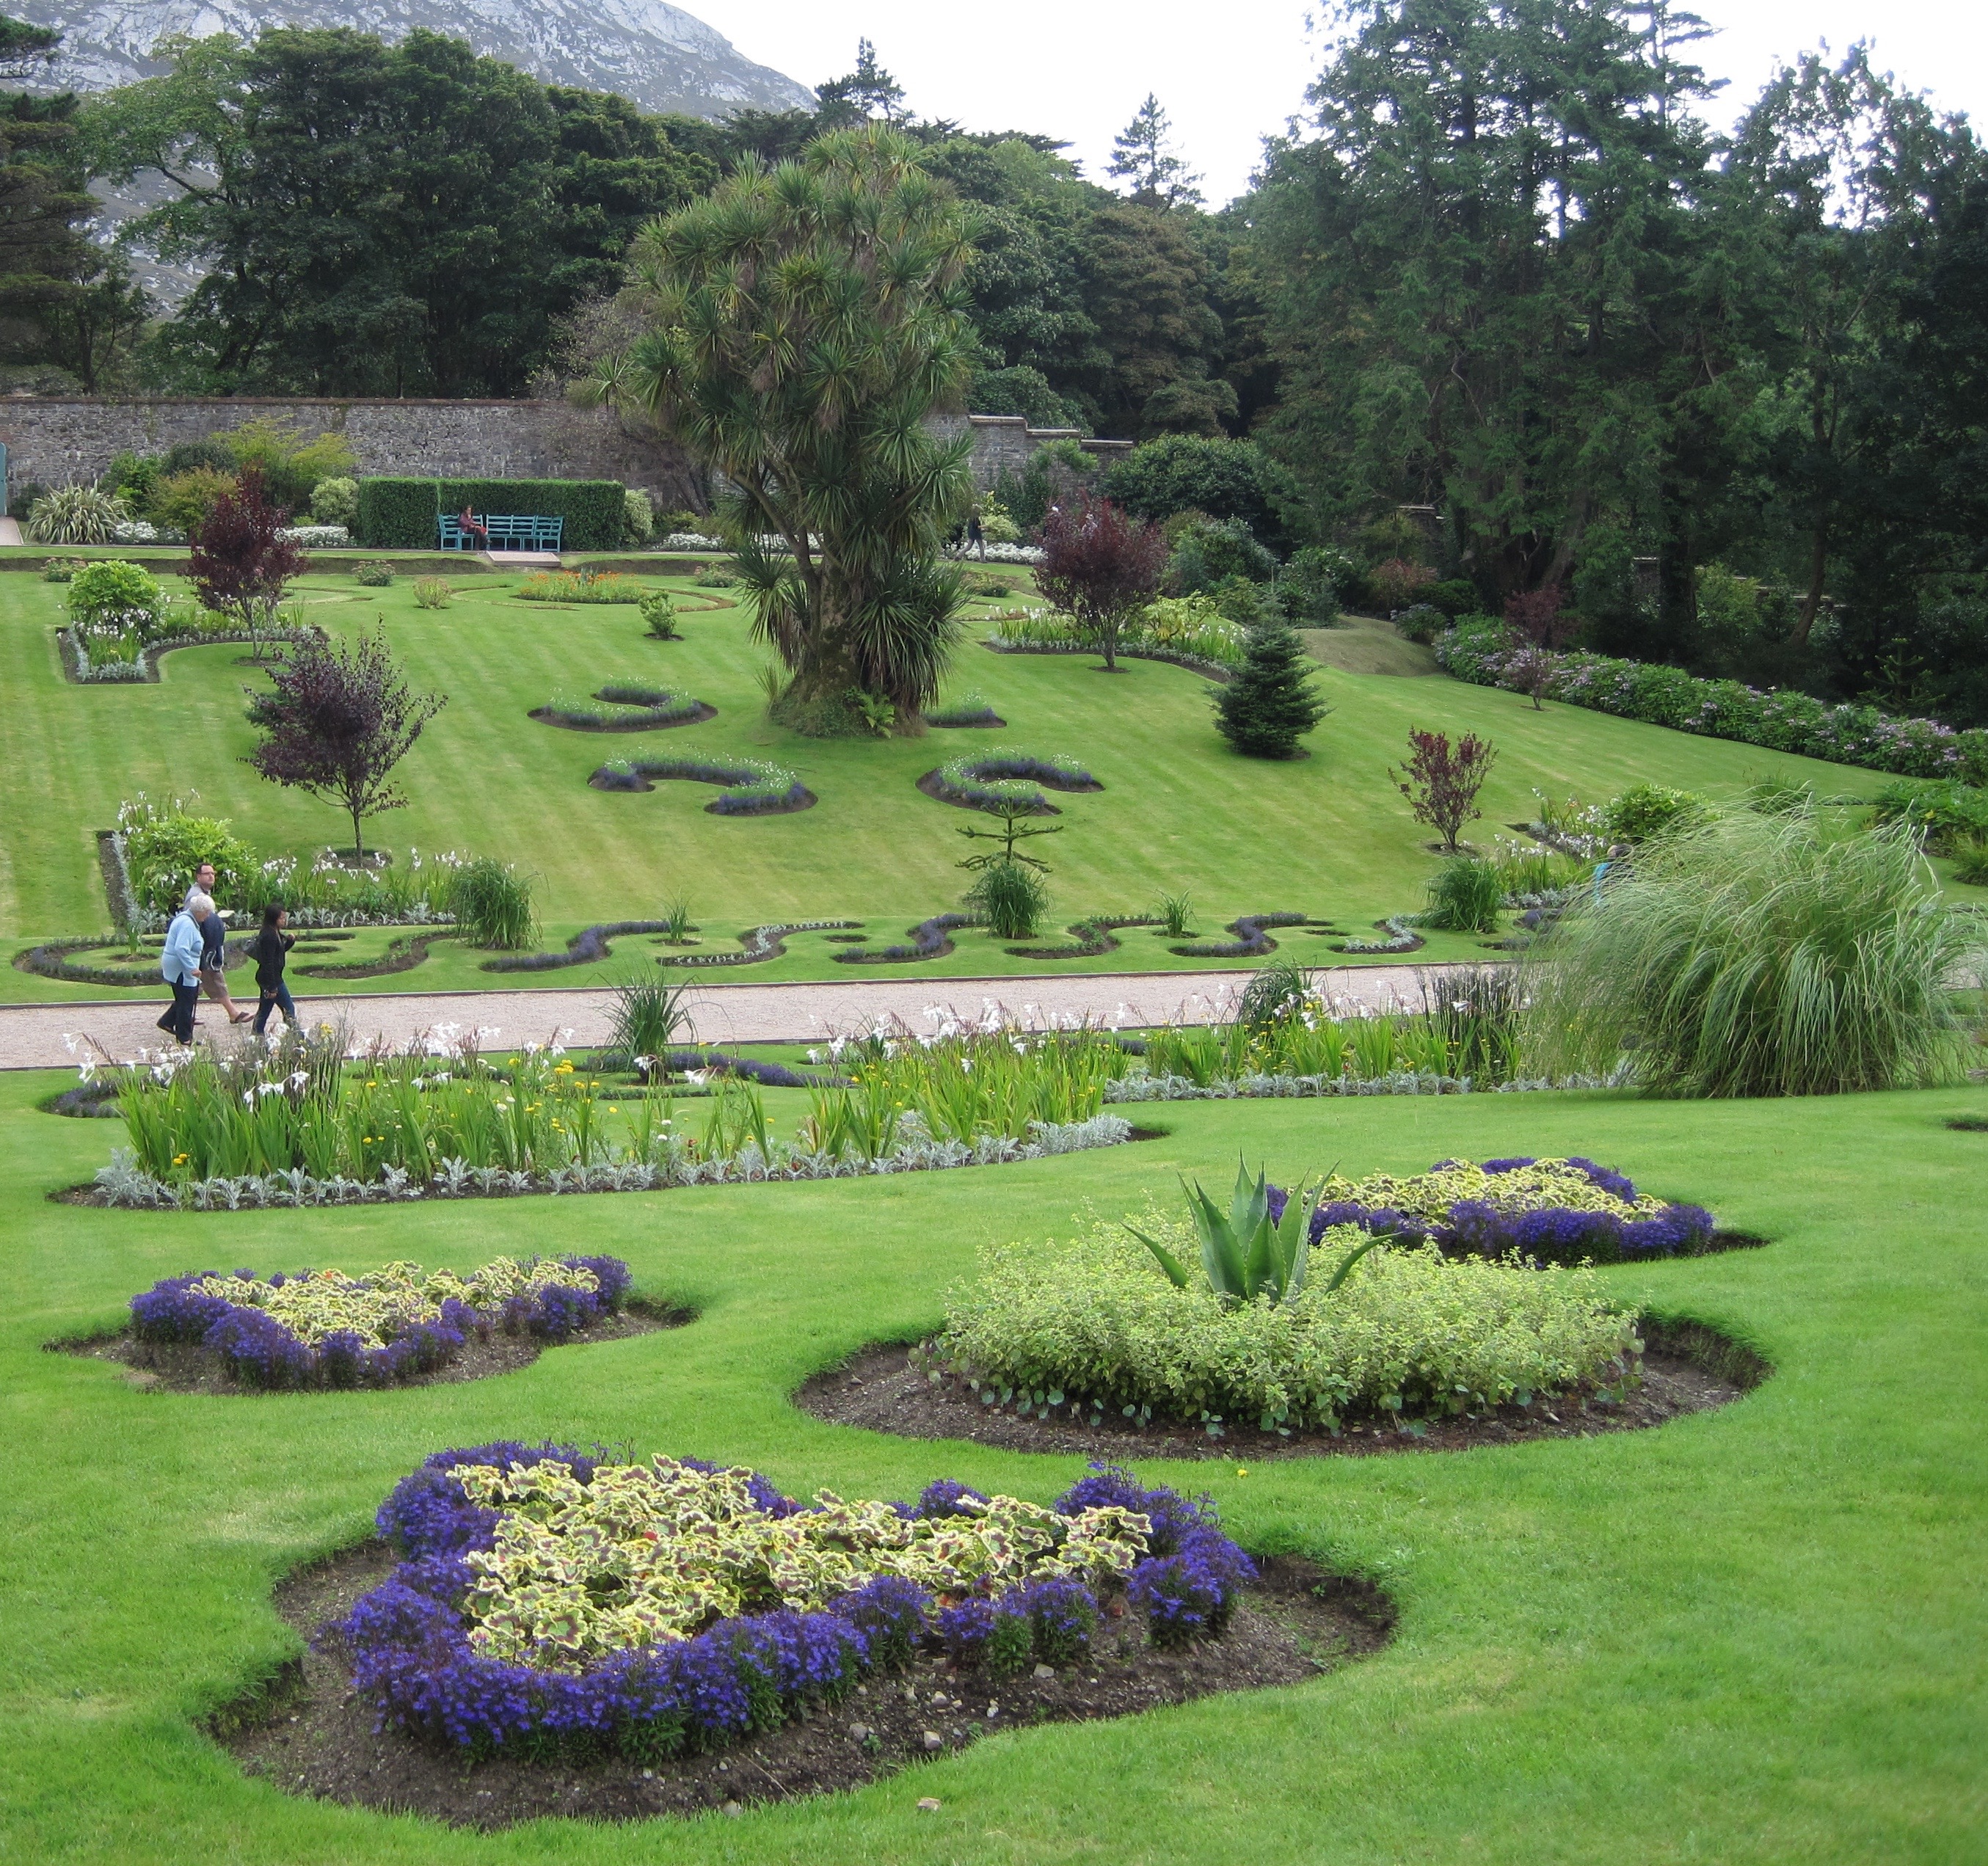 A glimpse of one of several formal gardens at Kylemore Abbey.